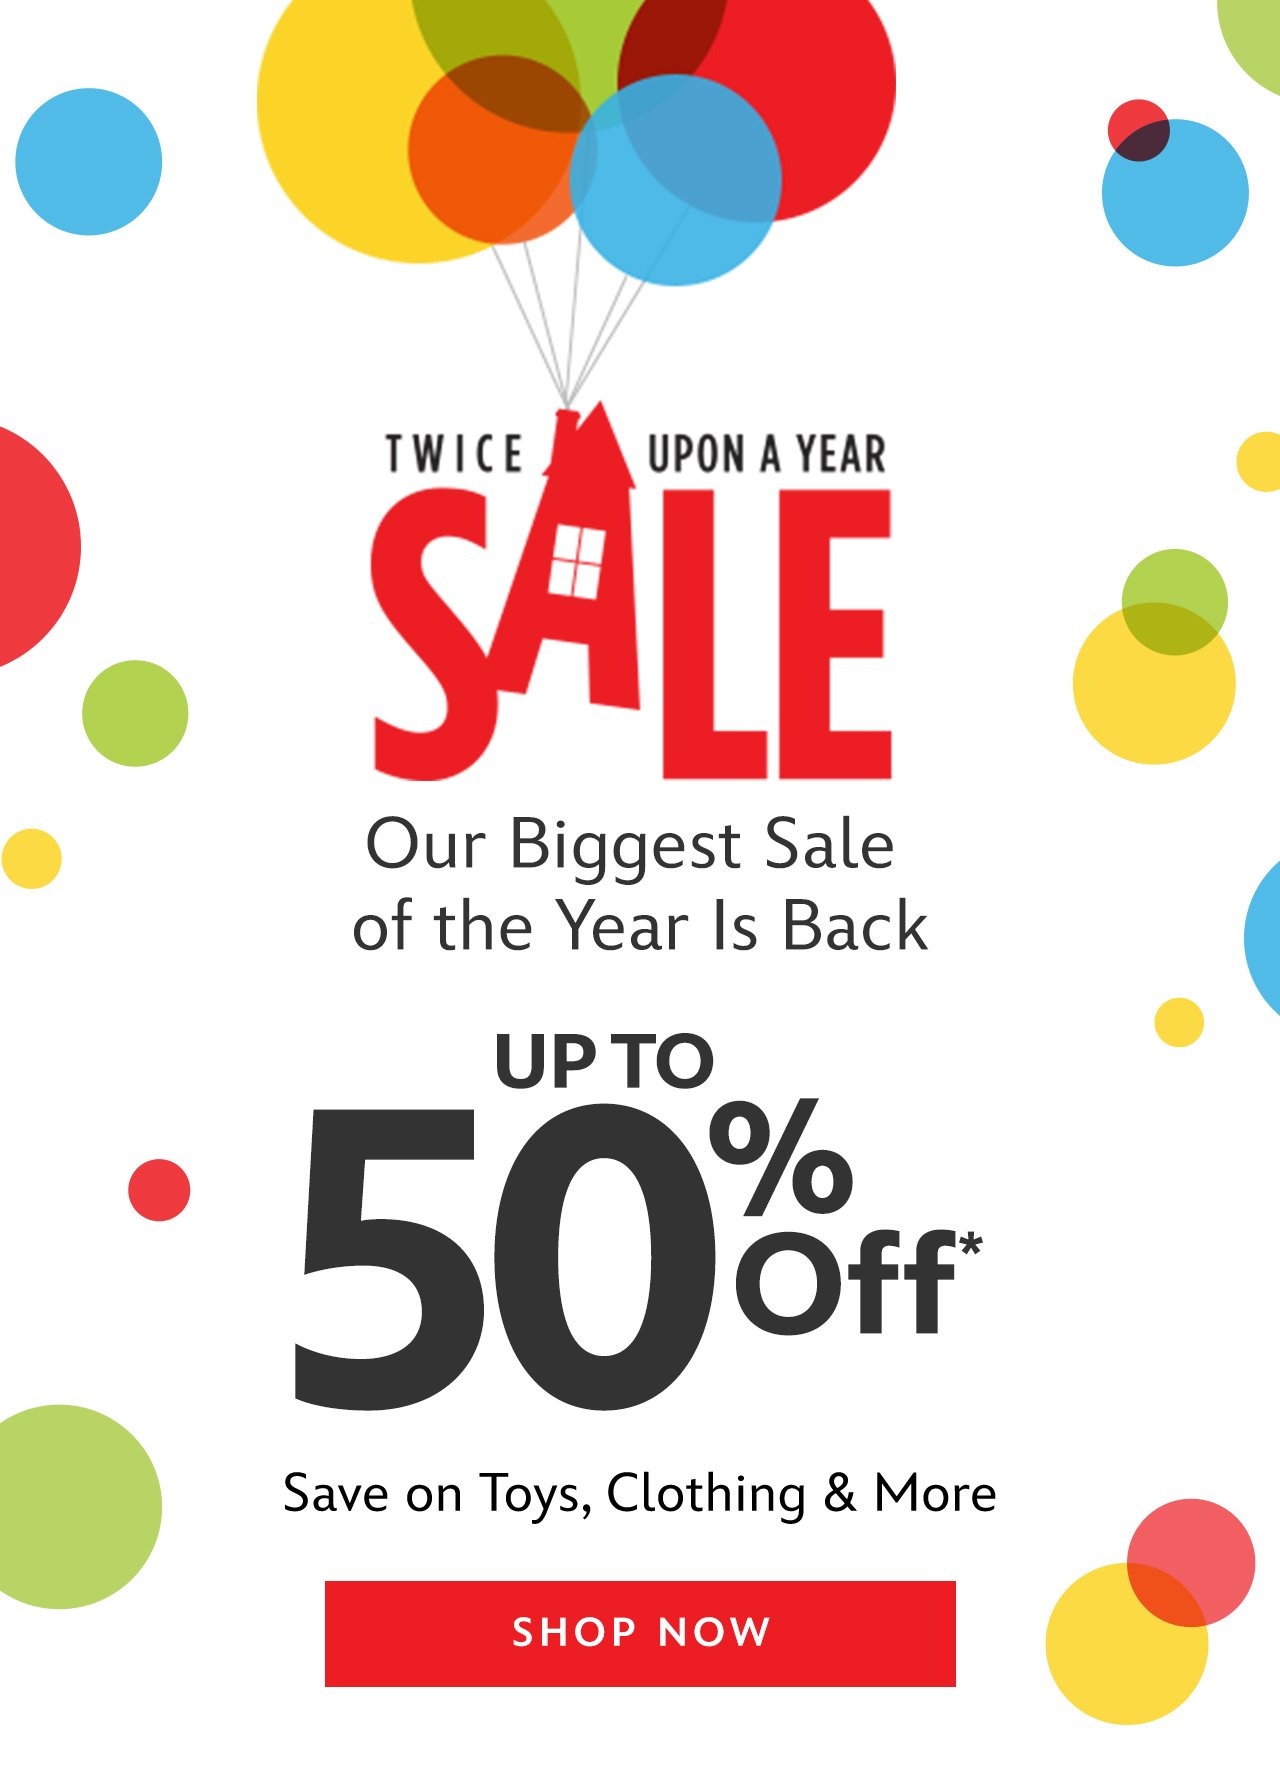 Our Biggest Sale of the Year Is Back. Up to 50% Off. Toys and so much more! | Shop Now